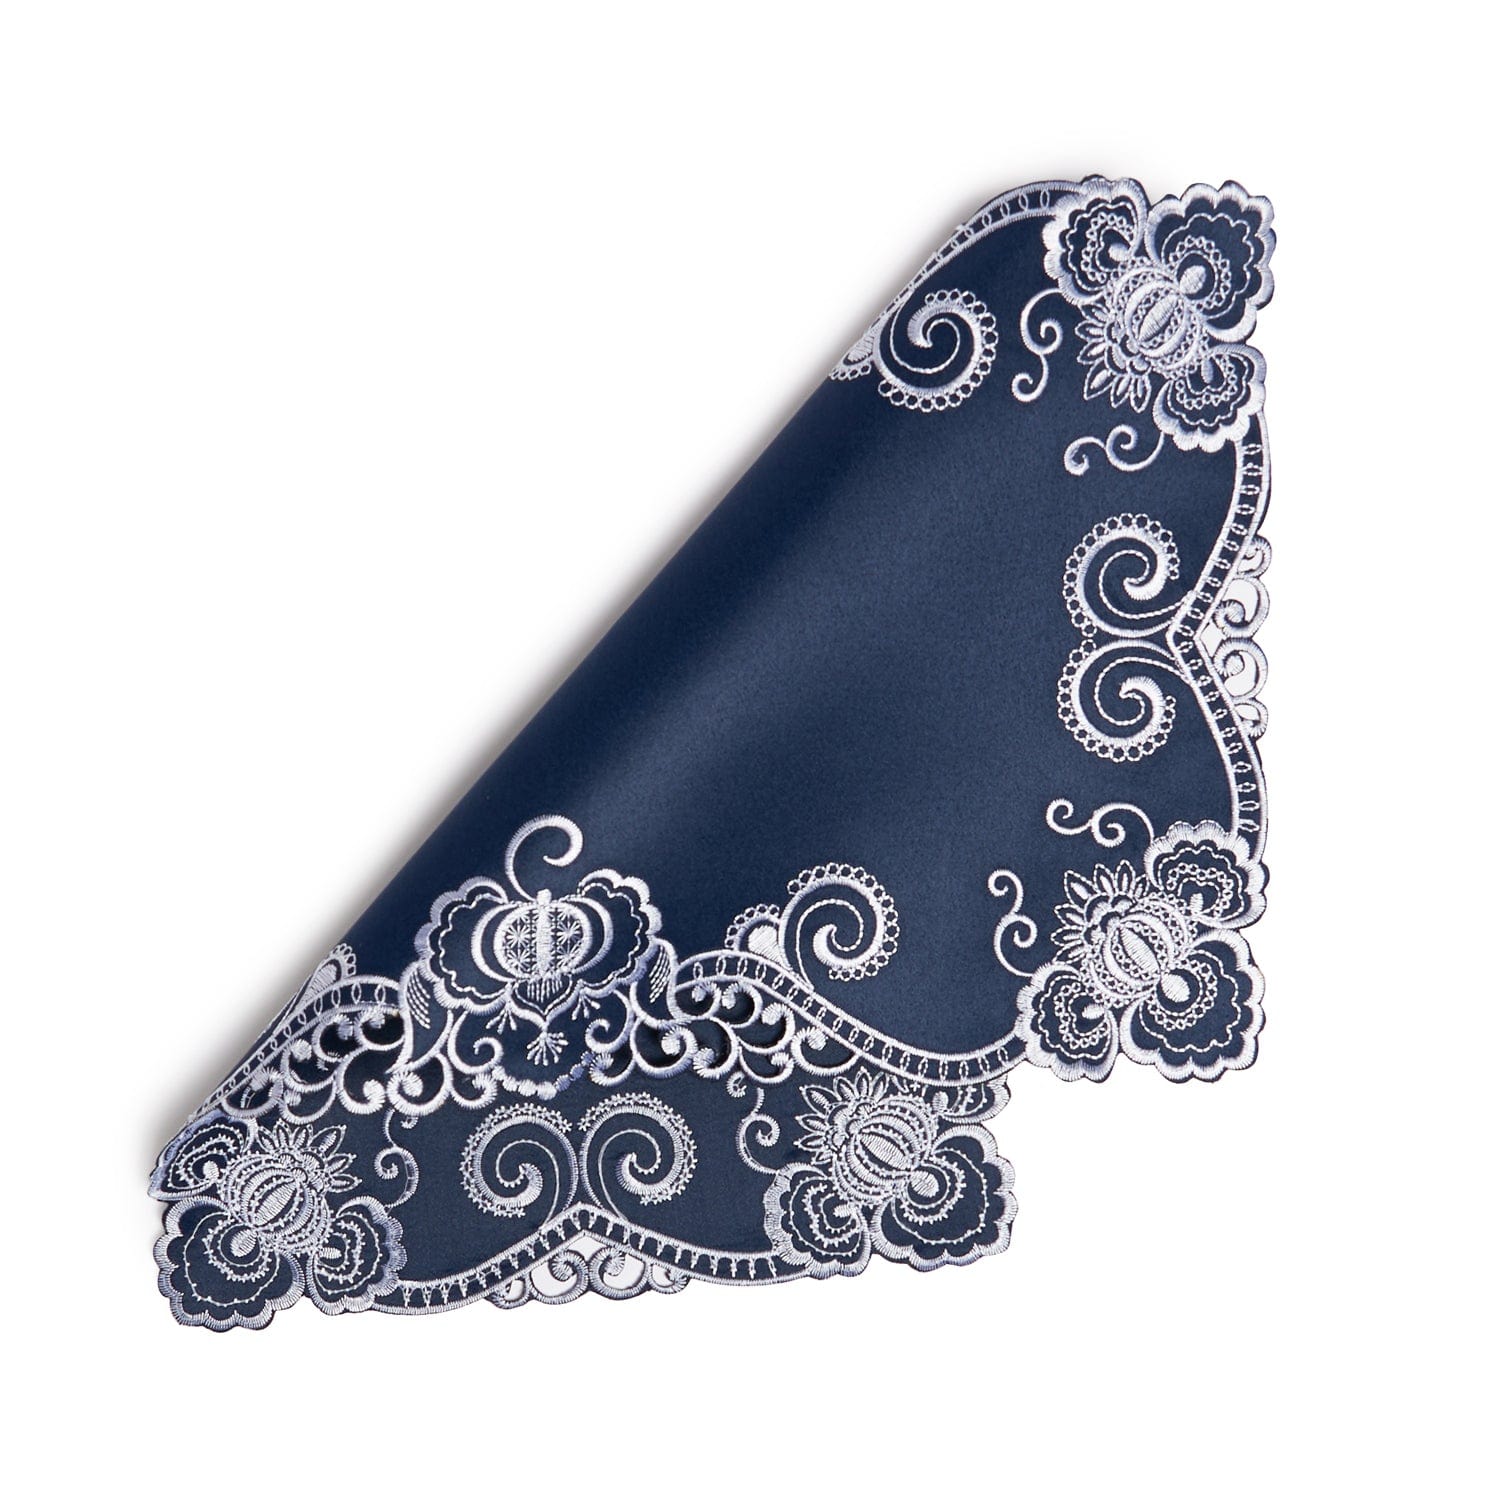 Paramount Midnight Blue Satin With White Embroidery Placemat 4Pcs Set